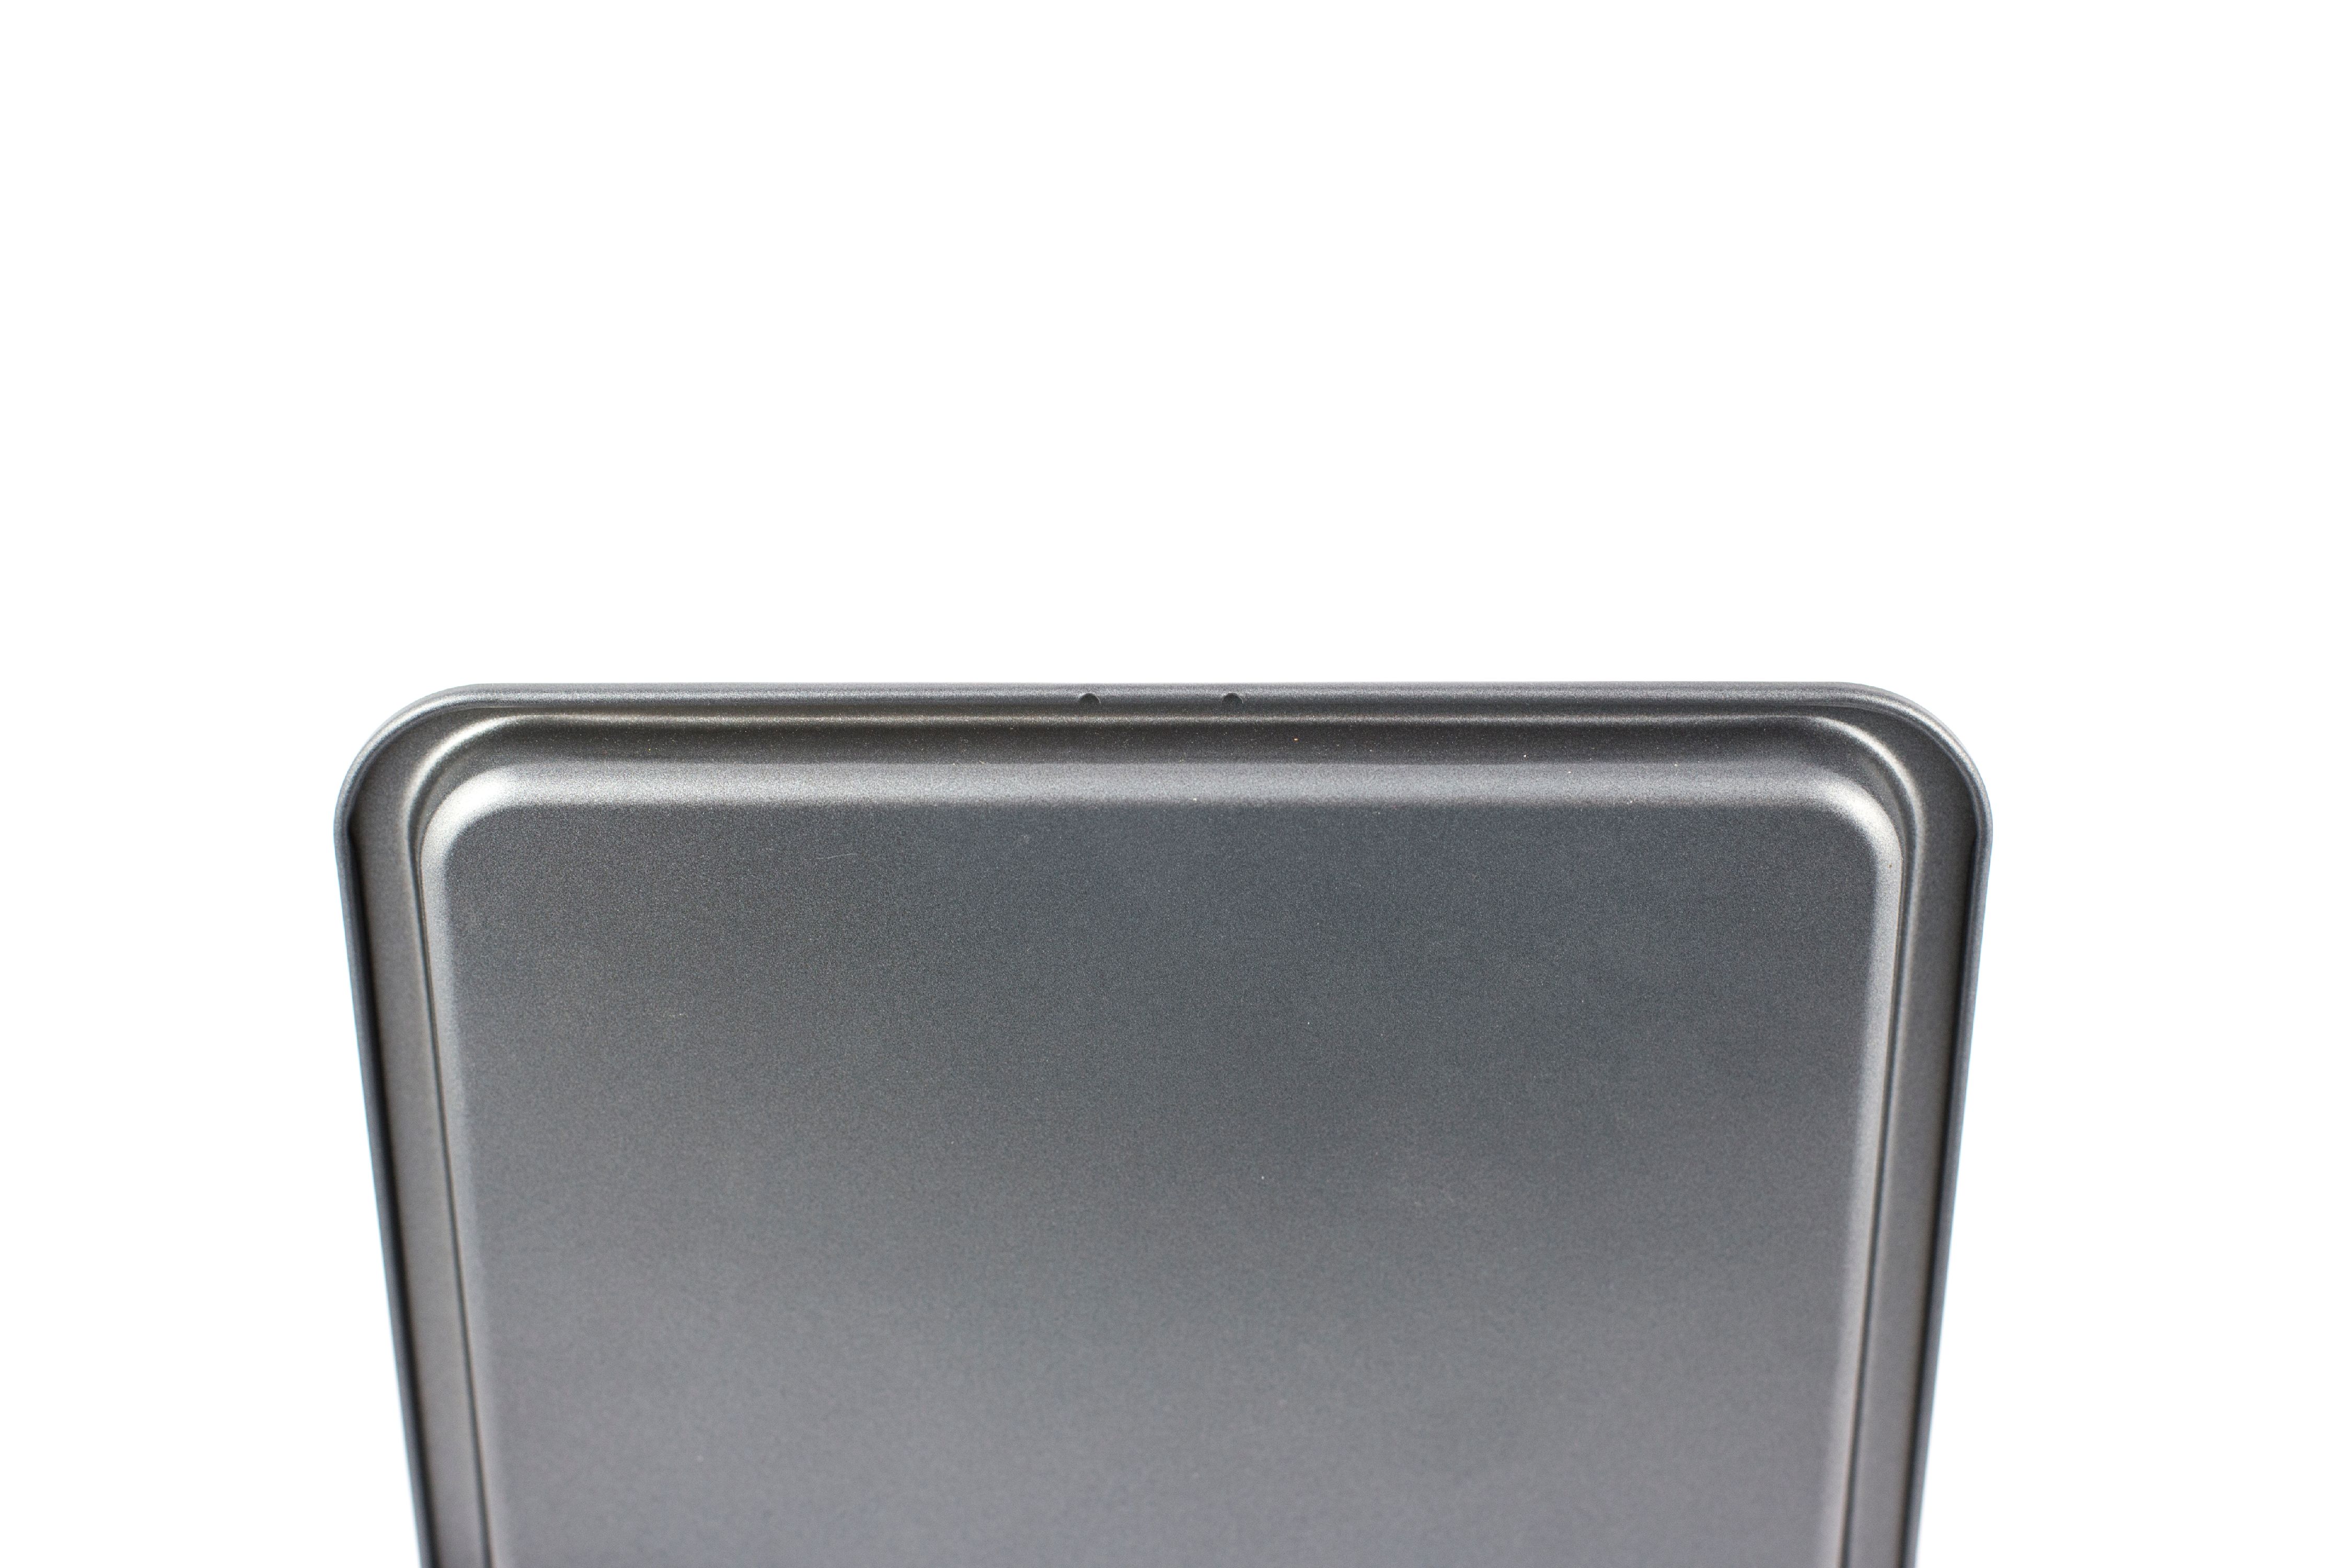 7" x 9" Mini Cookie Sheet Non-Stick Small Toaster Oven Pan Bakeware Replacement - image 3 of 3